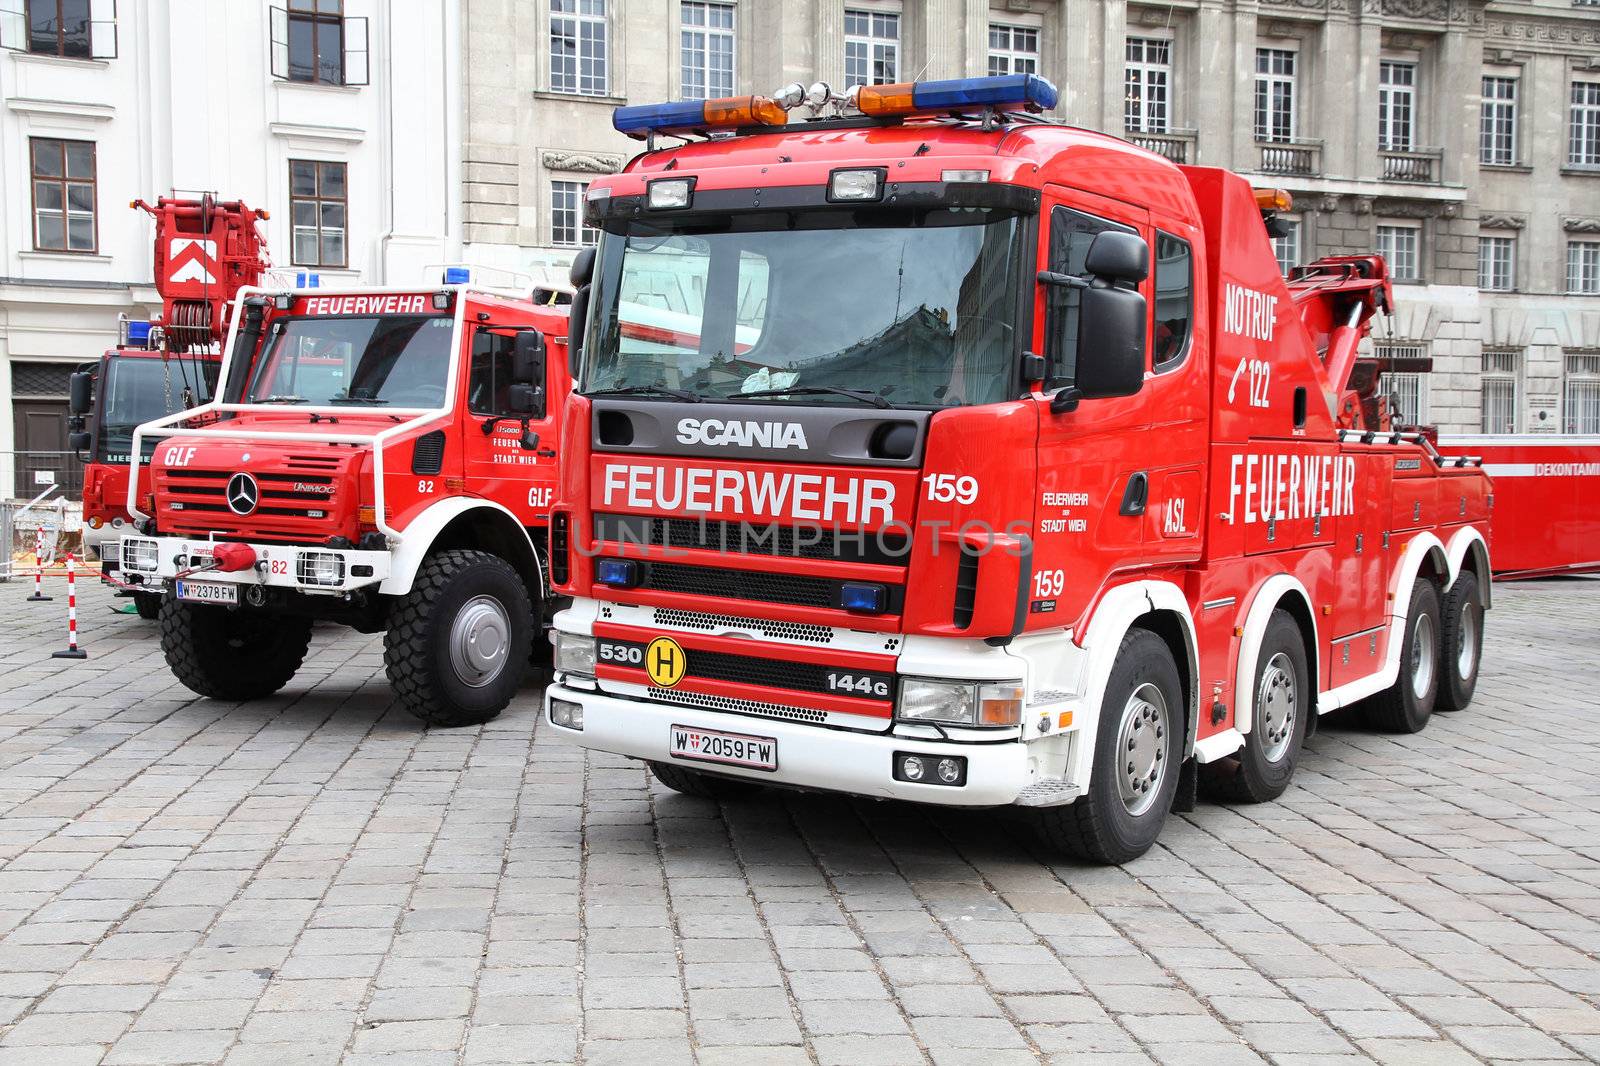 VIENNA - SEPTEMBER 8: Fire fighting vehicles on September 8, 2011 in Vienna. On September 9-11, 2011 Feuerwehrfest (Fire Fighters Festival) took place in Vienna.